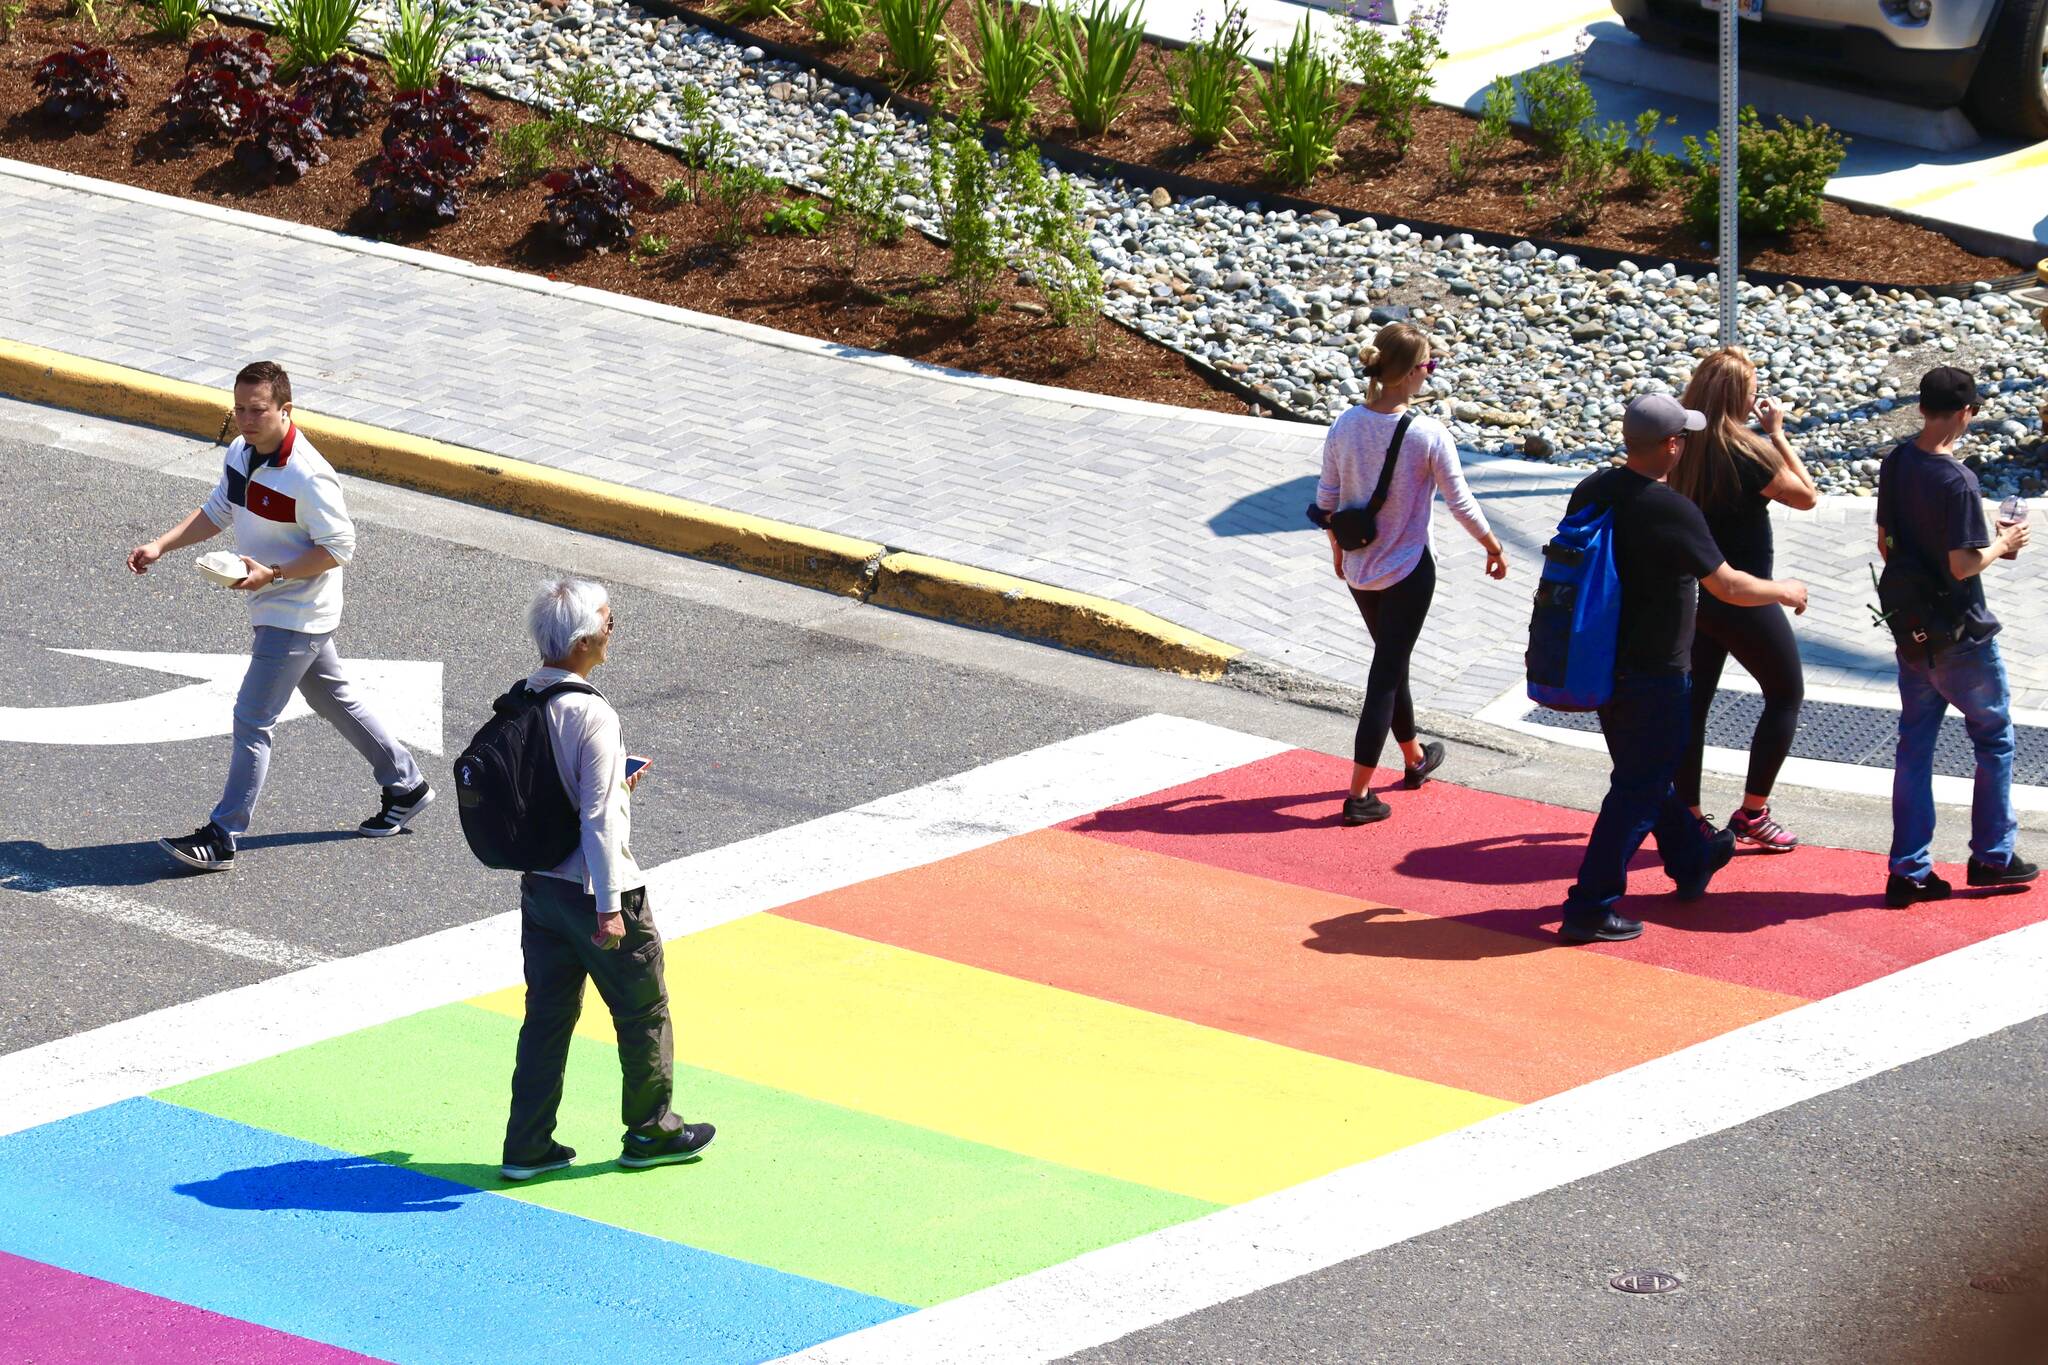 Michael S. Lockett / Juneau Empire
Pedestrians cross the newly repainted rainbow crosswalk downtown on Thursday, June 16, 2022. Painting of the crosswalk was delayed by supply chain issues.